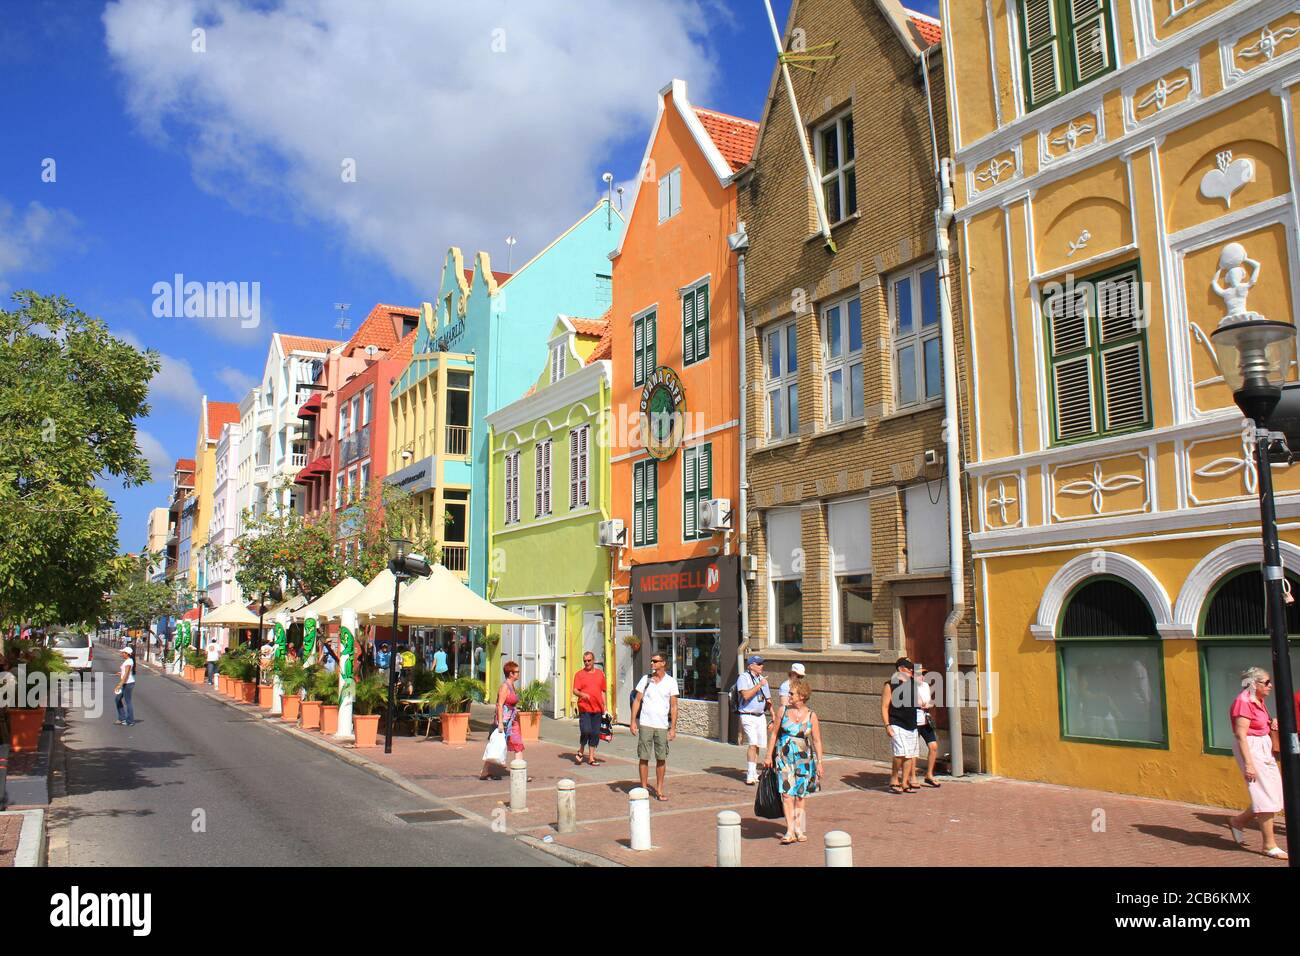 WILLEMSTAD, CURACAO - FEBRUARY 11, 2014: Colorful waterfront houses in Willemstad historic district Punda on Curacao island. The city center is UNESCO Stock Photo